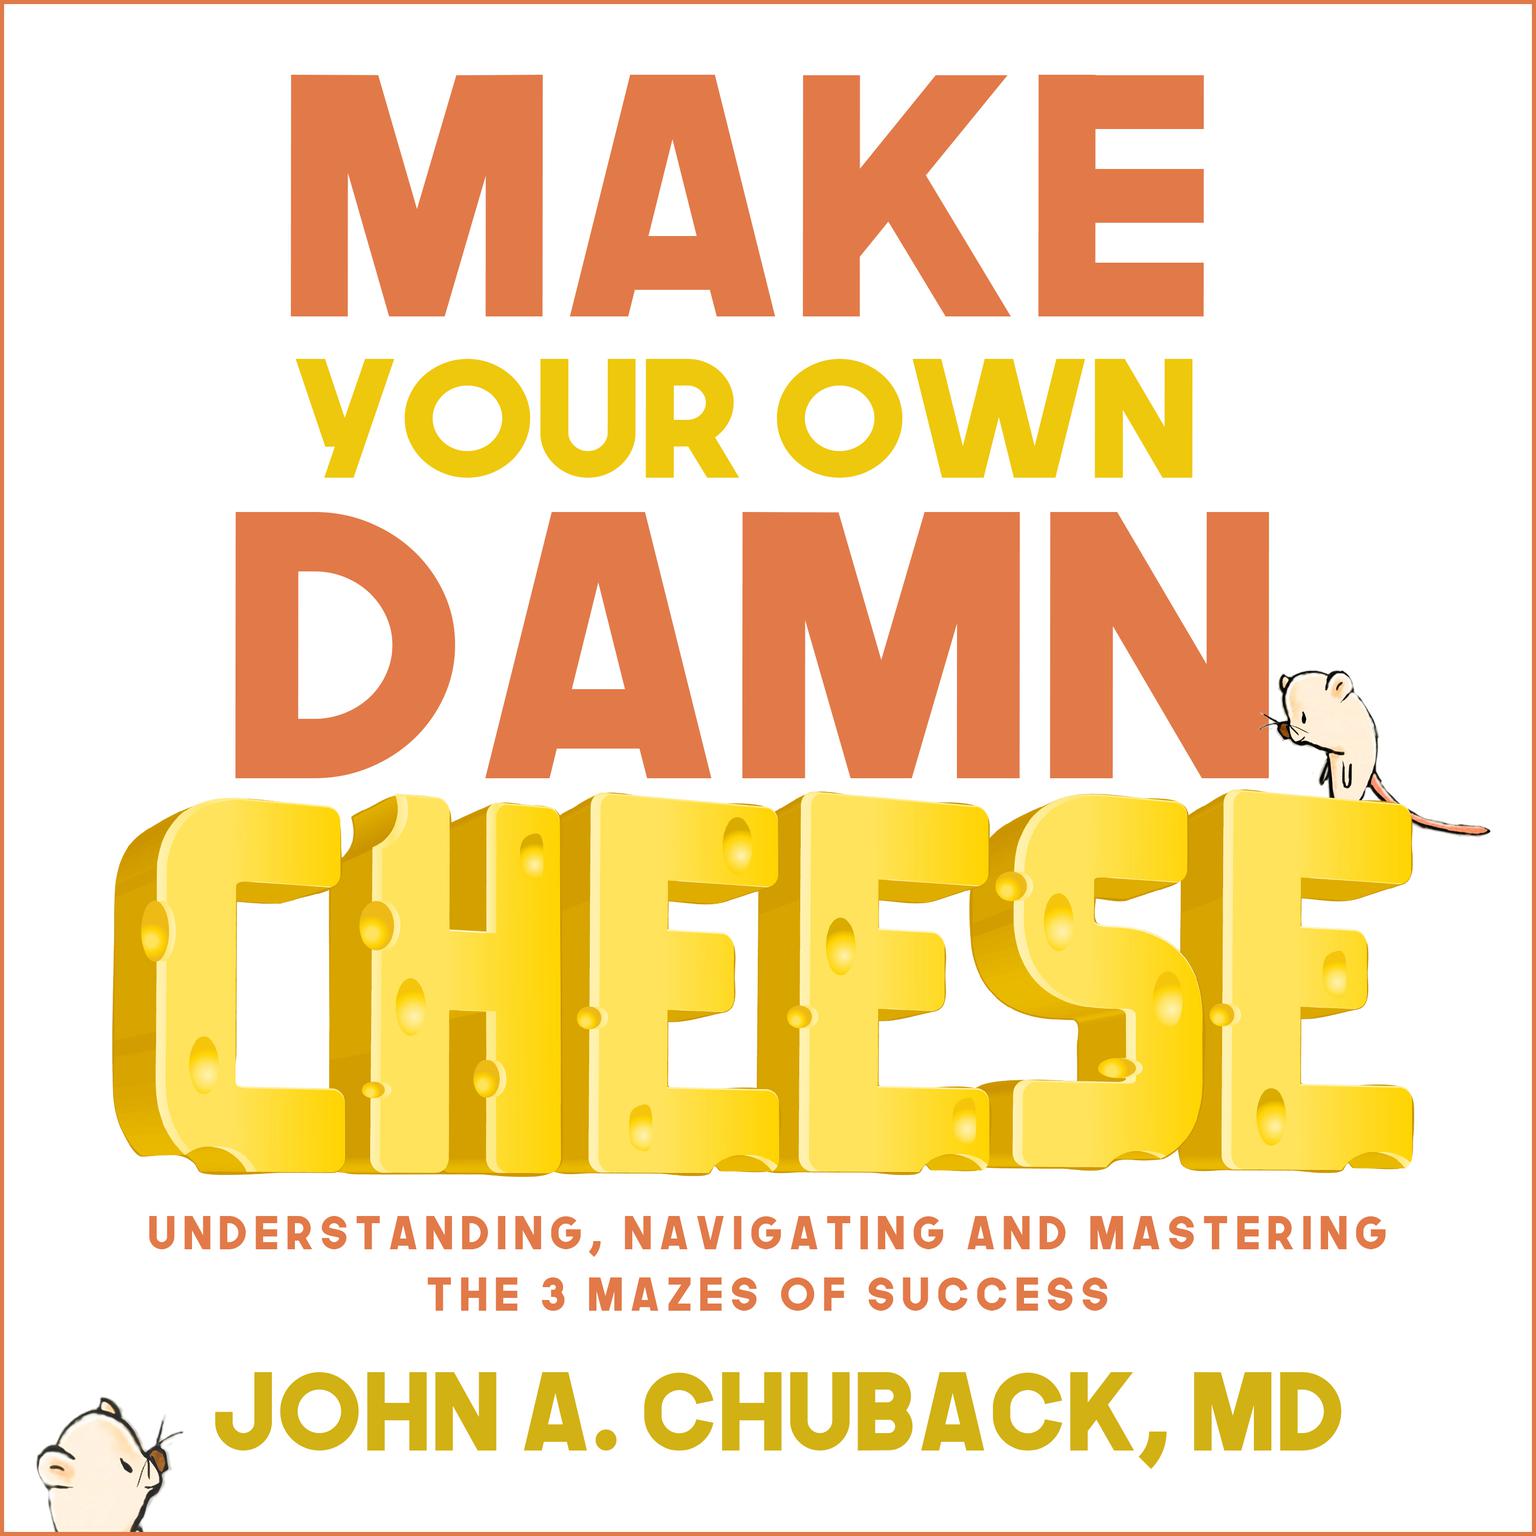 Make Your Own Damn Cheese: Understanding, Navigating, and Mastering the 3 Mazes of Success Audiobook, by John Chuback